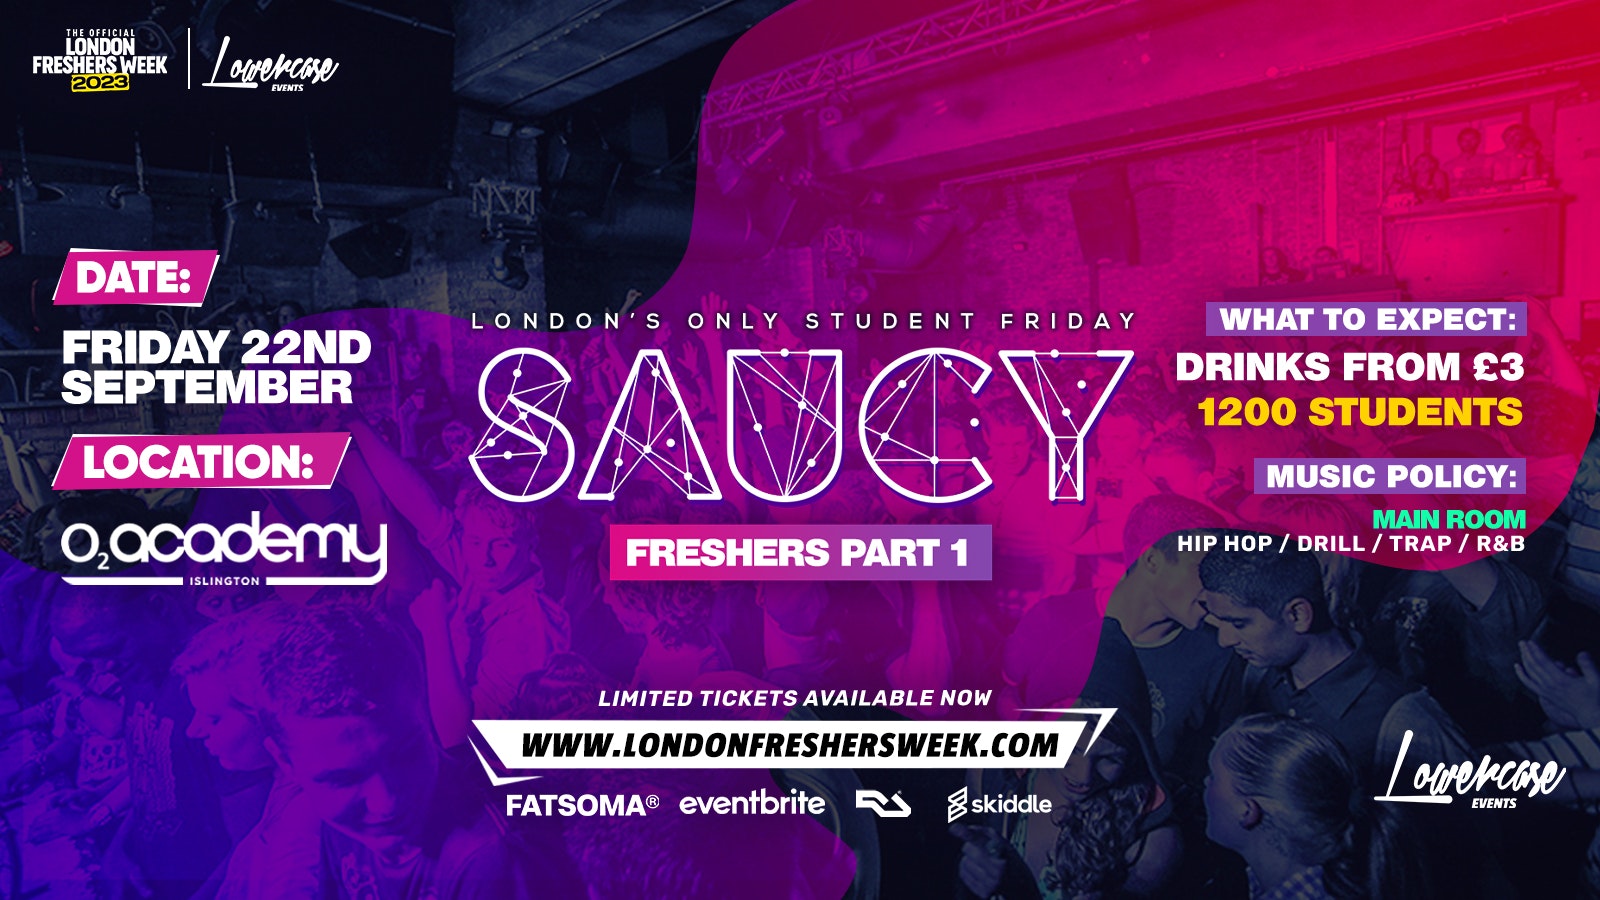 ⚠️ FRESHERS PART 1 ⚠️ Saucy Fridays 🎉 – London’s Biggest Weekly Student Friday